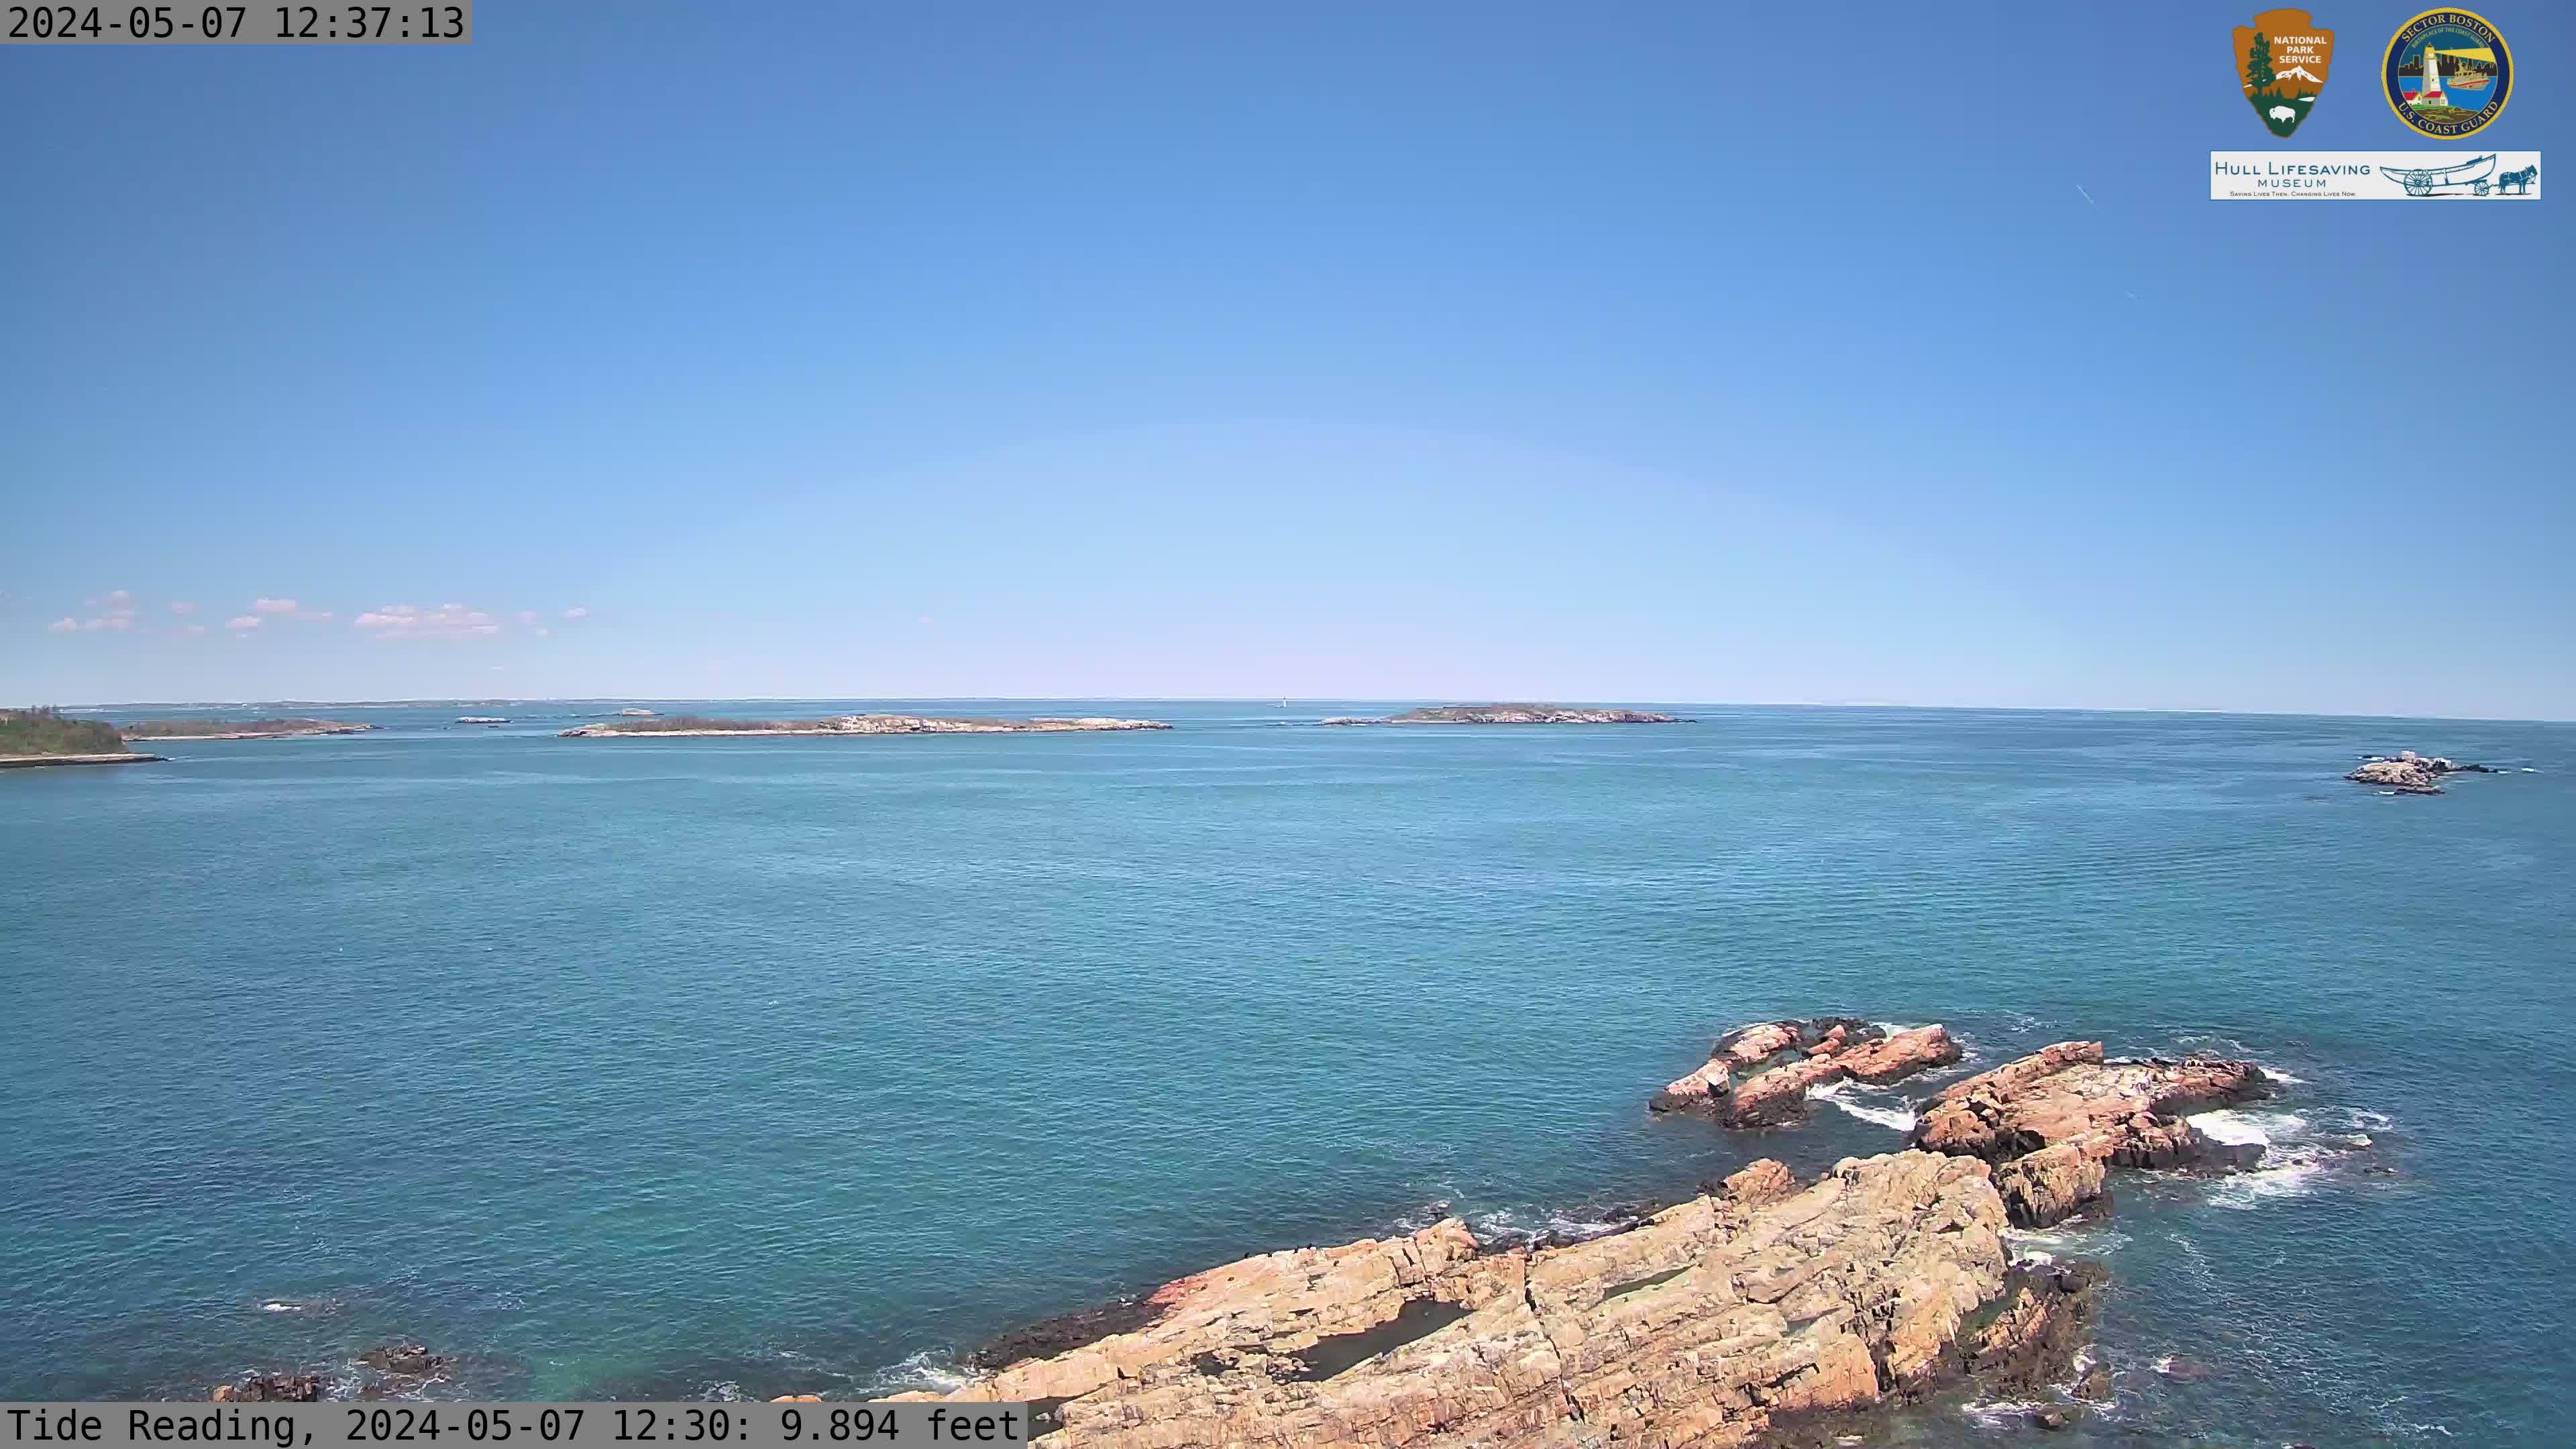 Webcam view of Boston Harbor from the Little Brewster Island Light looking north